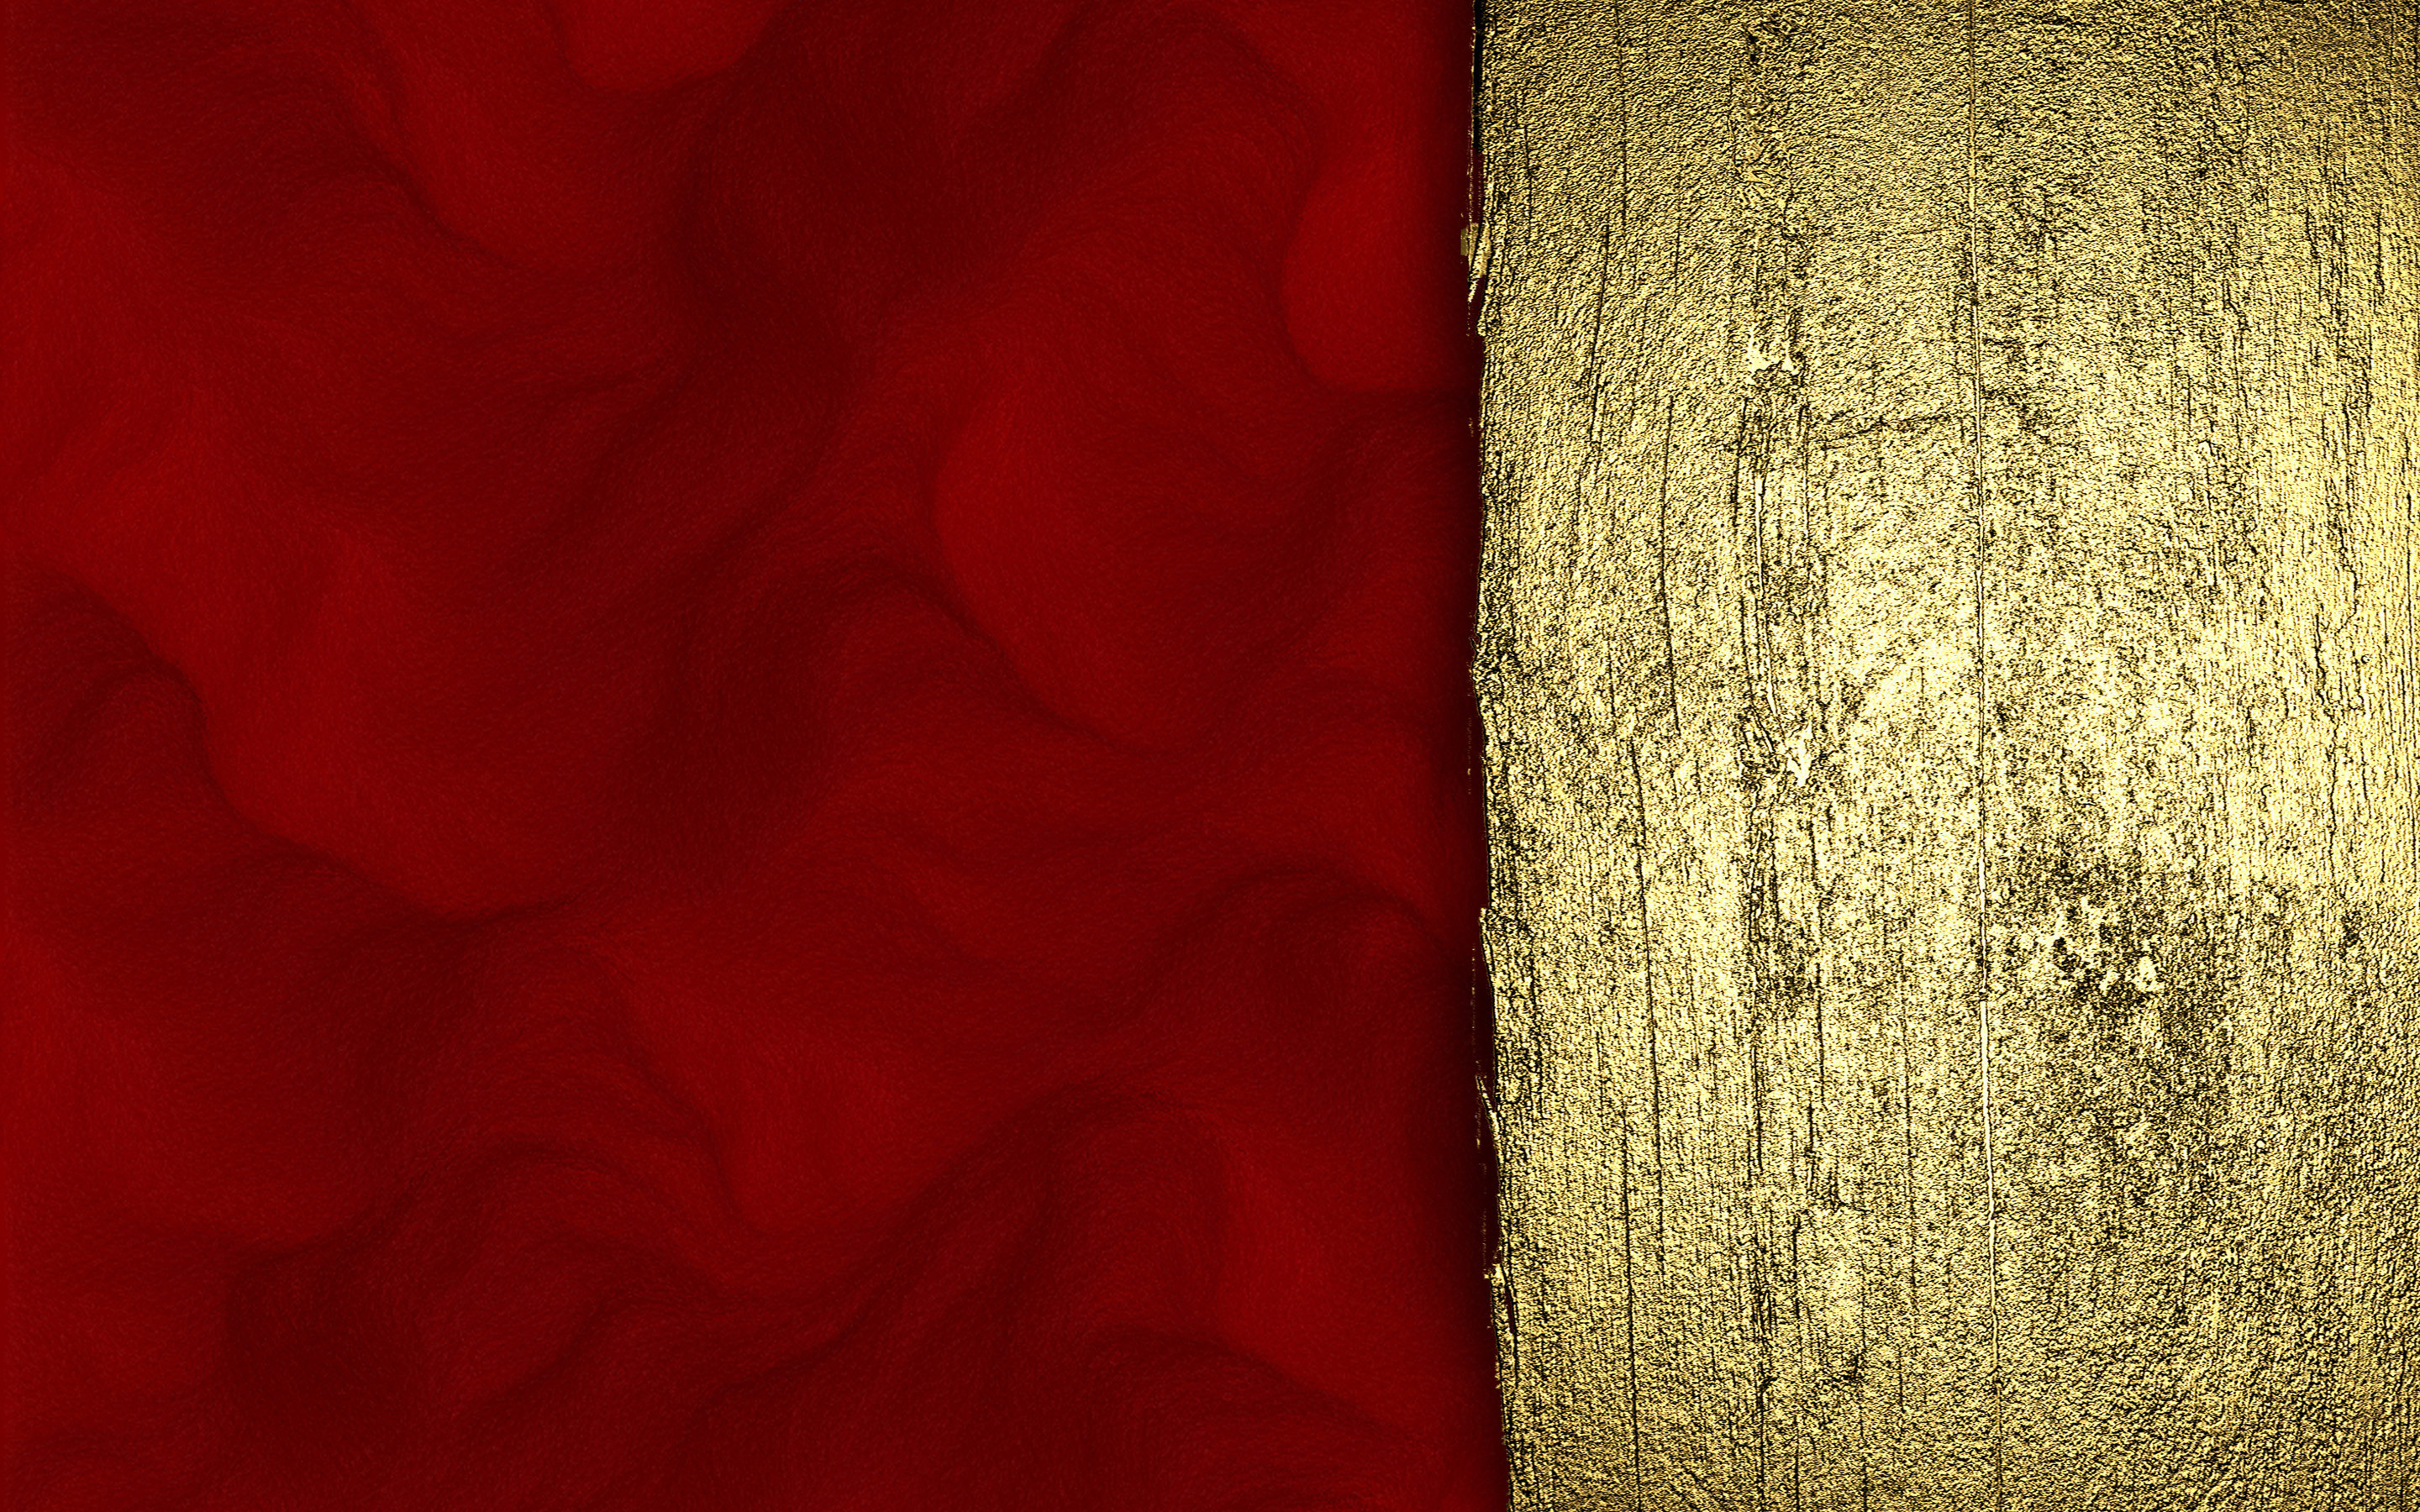 2880x1800 red and gold background images hd red and gold b